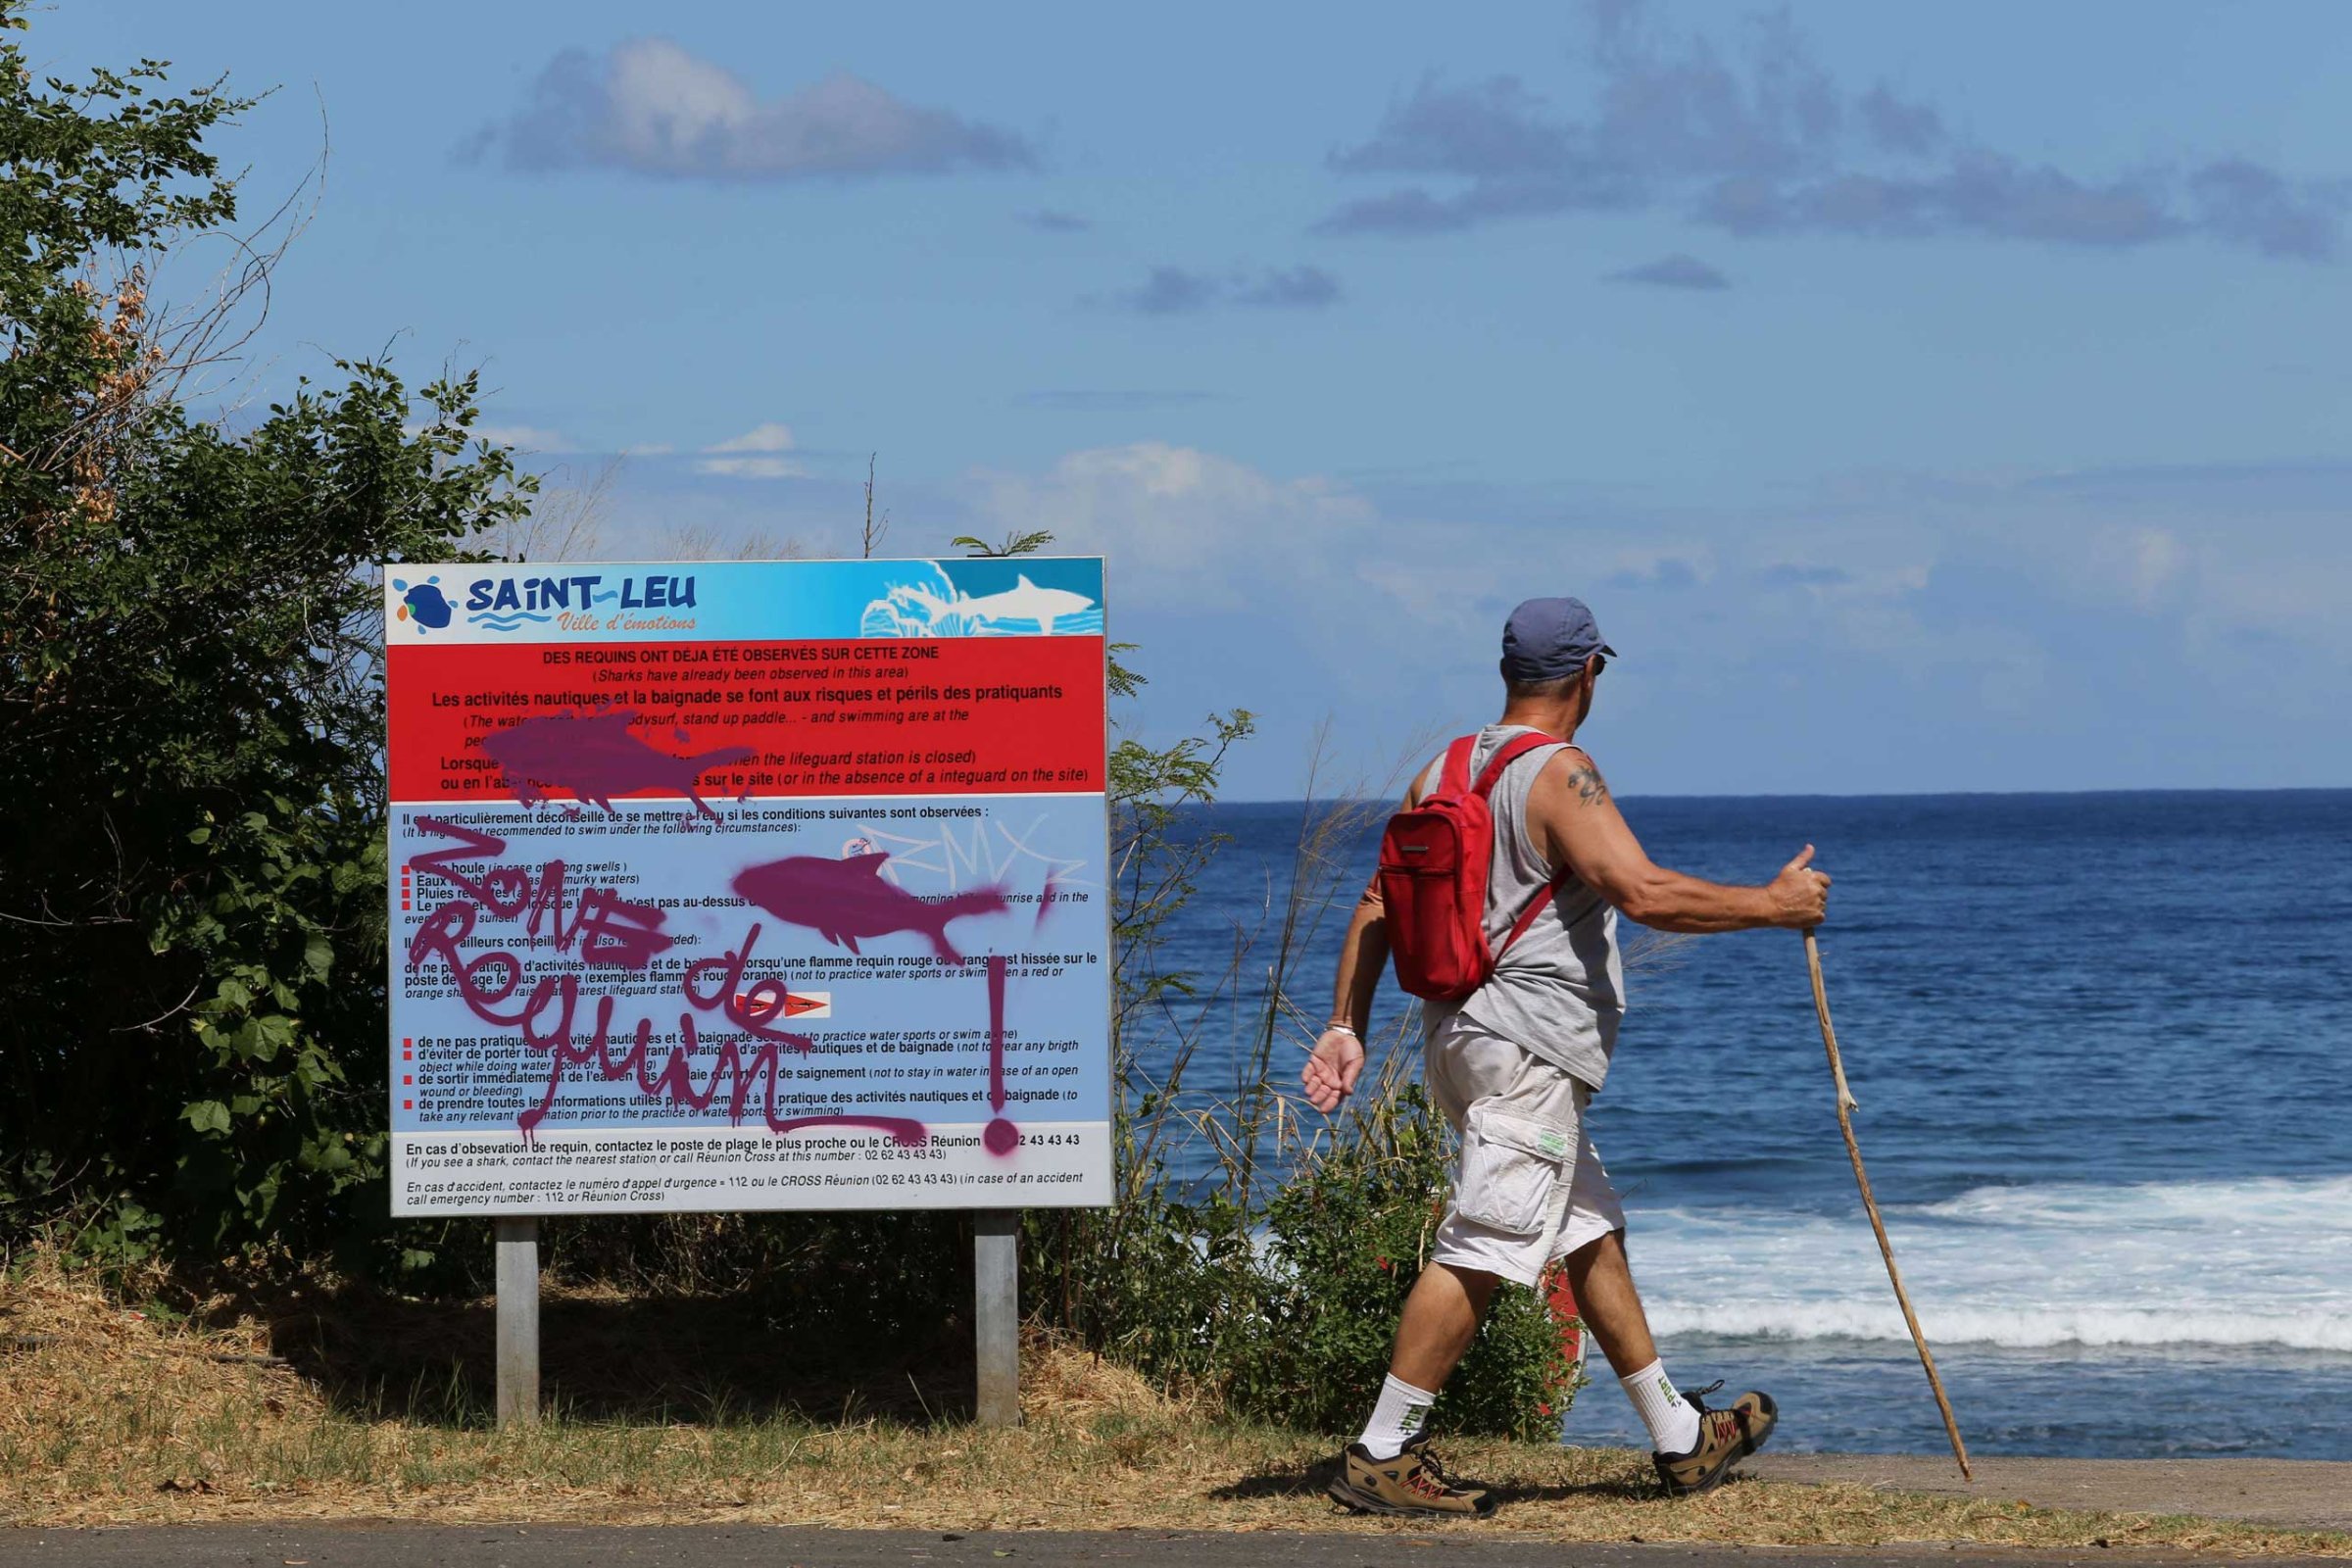 A graffiti reading "Shark's area" has been written on an information board, on April 14, 2015 off Saint-Leu, on the western coast of the French Indian Ocean island of La Reunion, two days after a 13-year-old Elio Canestri was attacked and killed by a shark.